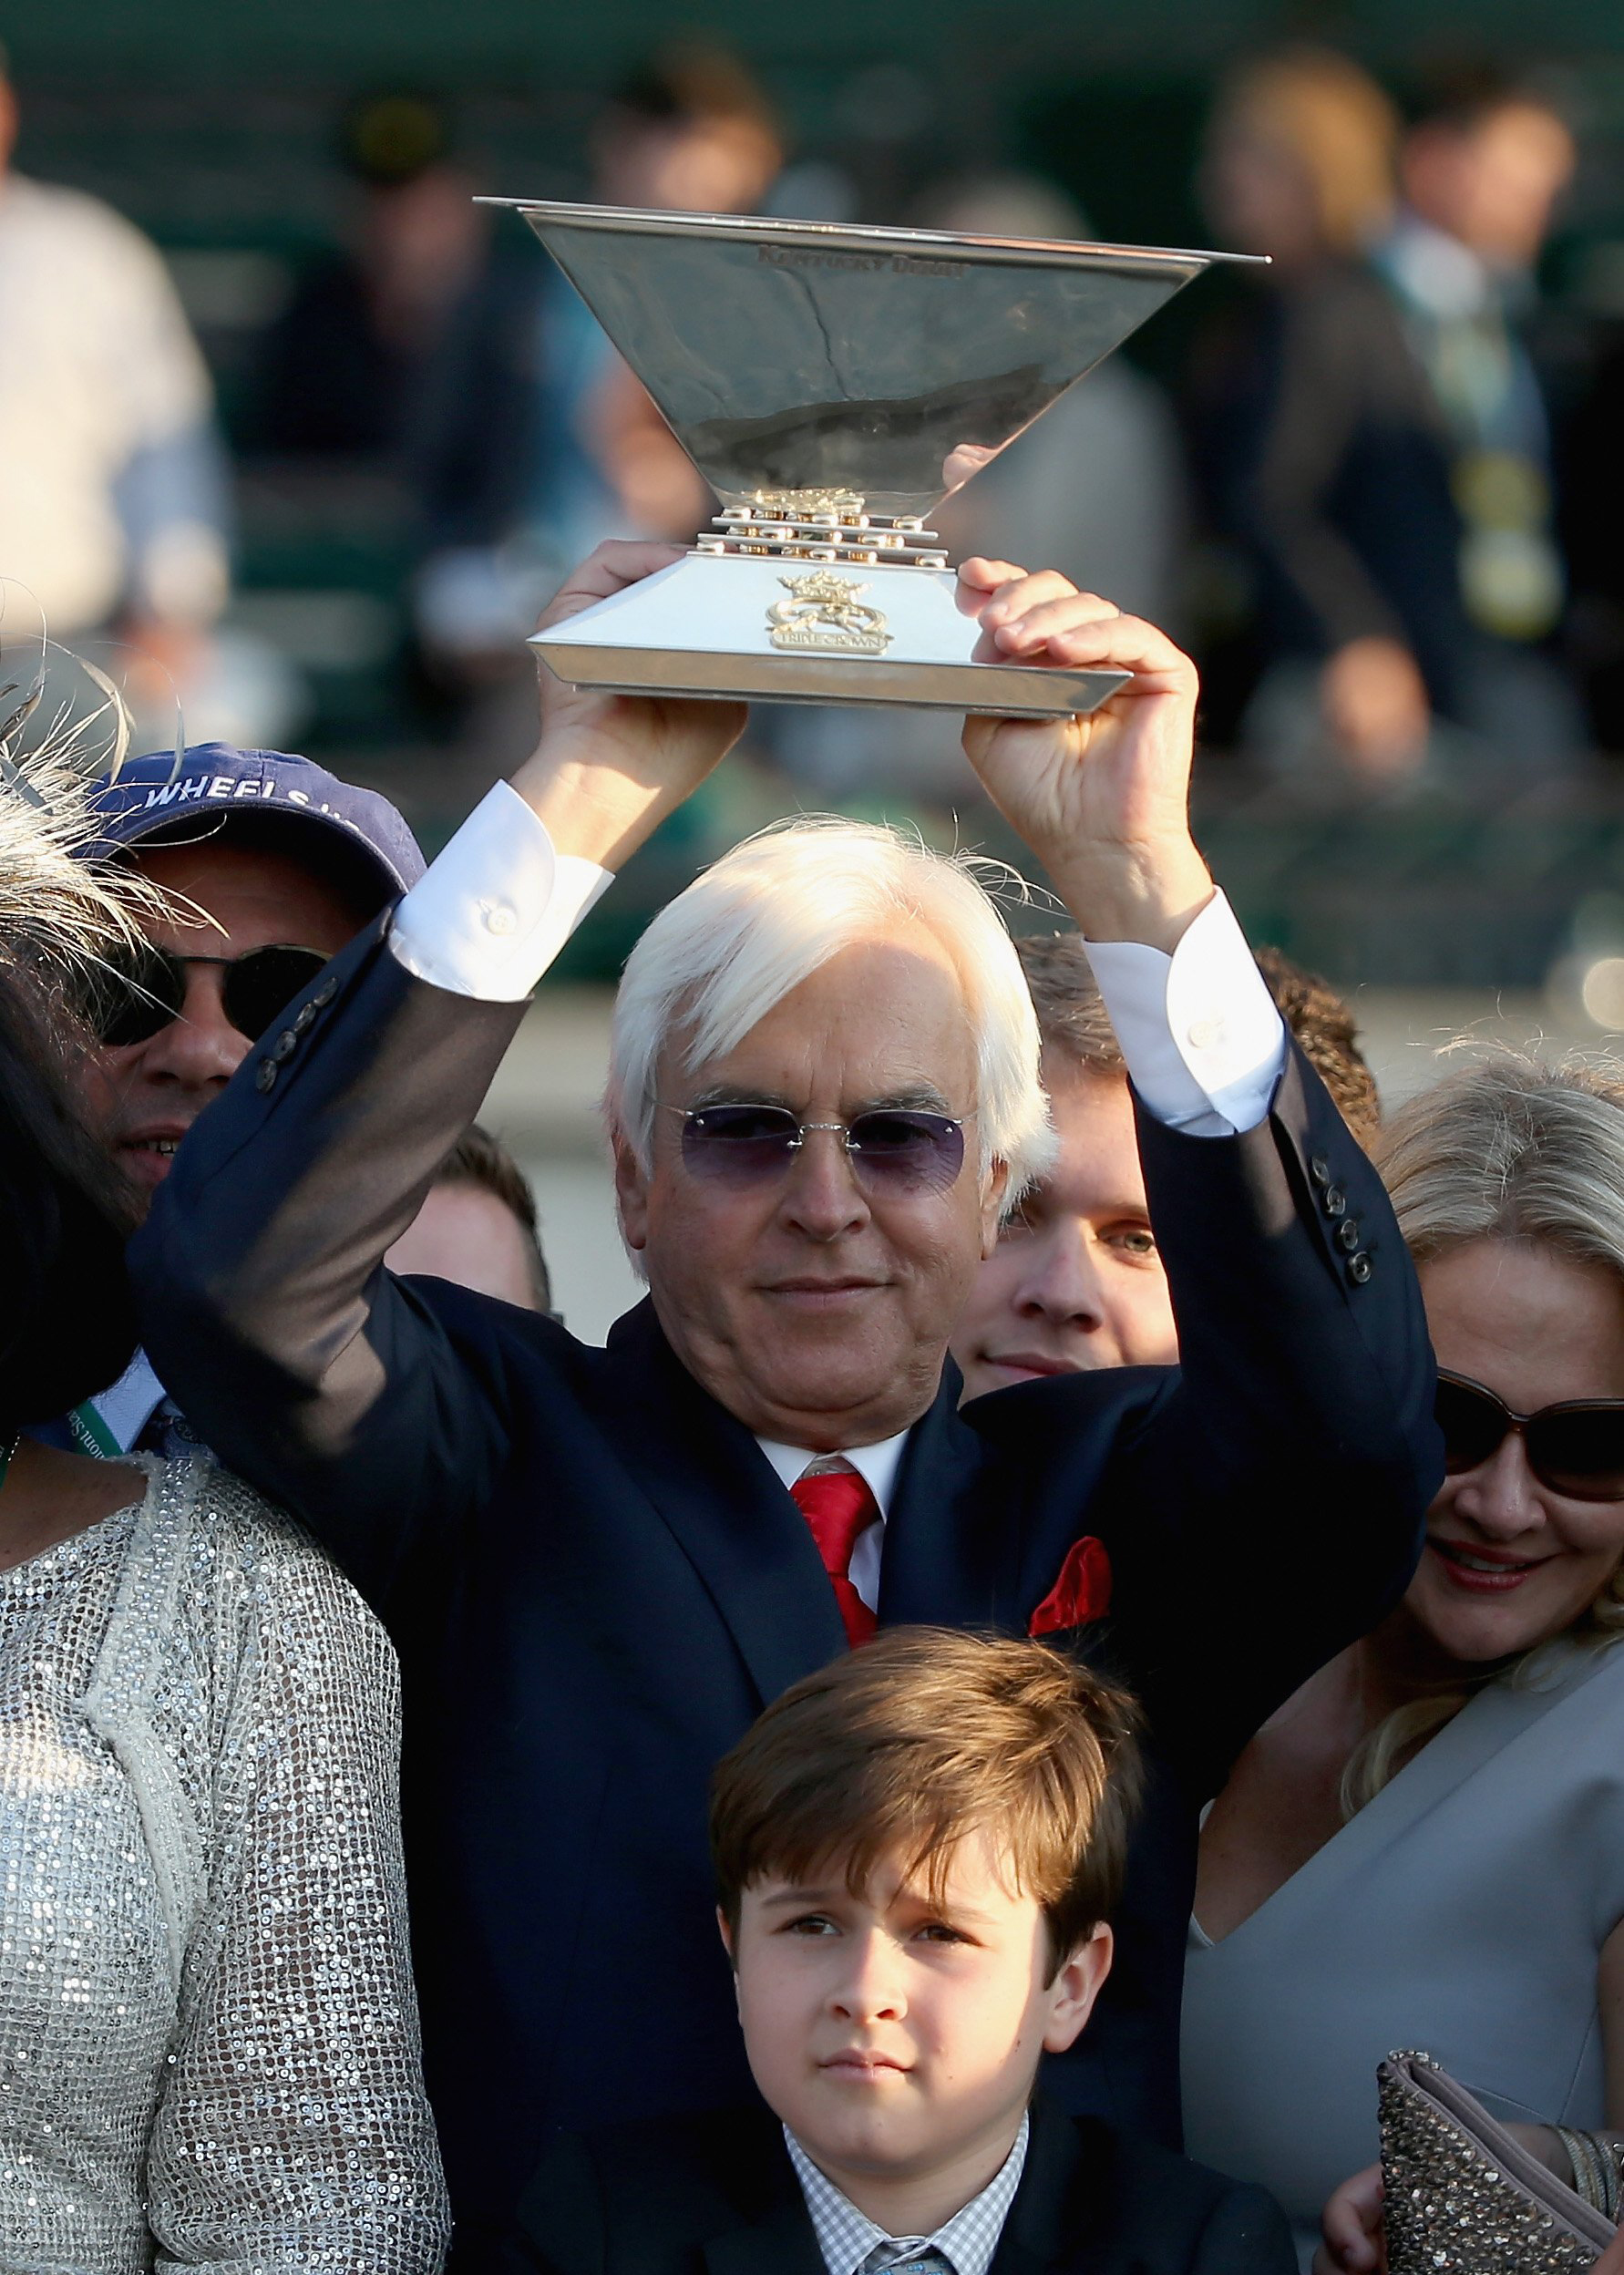 Trainer, Bob Baffert, of American Pharoah #5 celebrates with the Triple Crown Trophy after winning the 147th running of the Belmont Stakes at Belmont Park on June 6, 2015 in Elmont, N.Y. (Streeter Lecka—Getty Images)